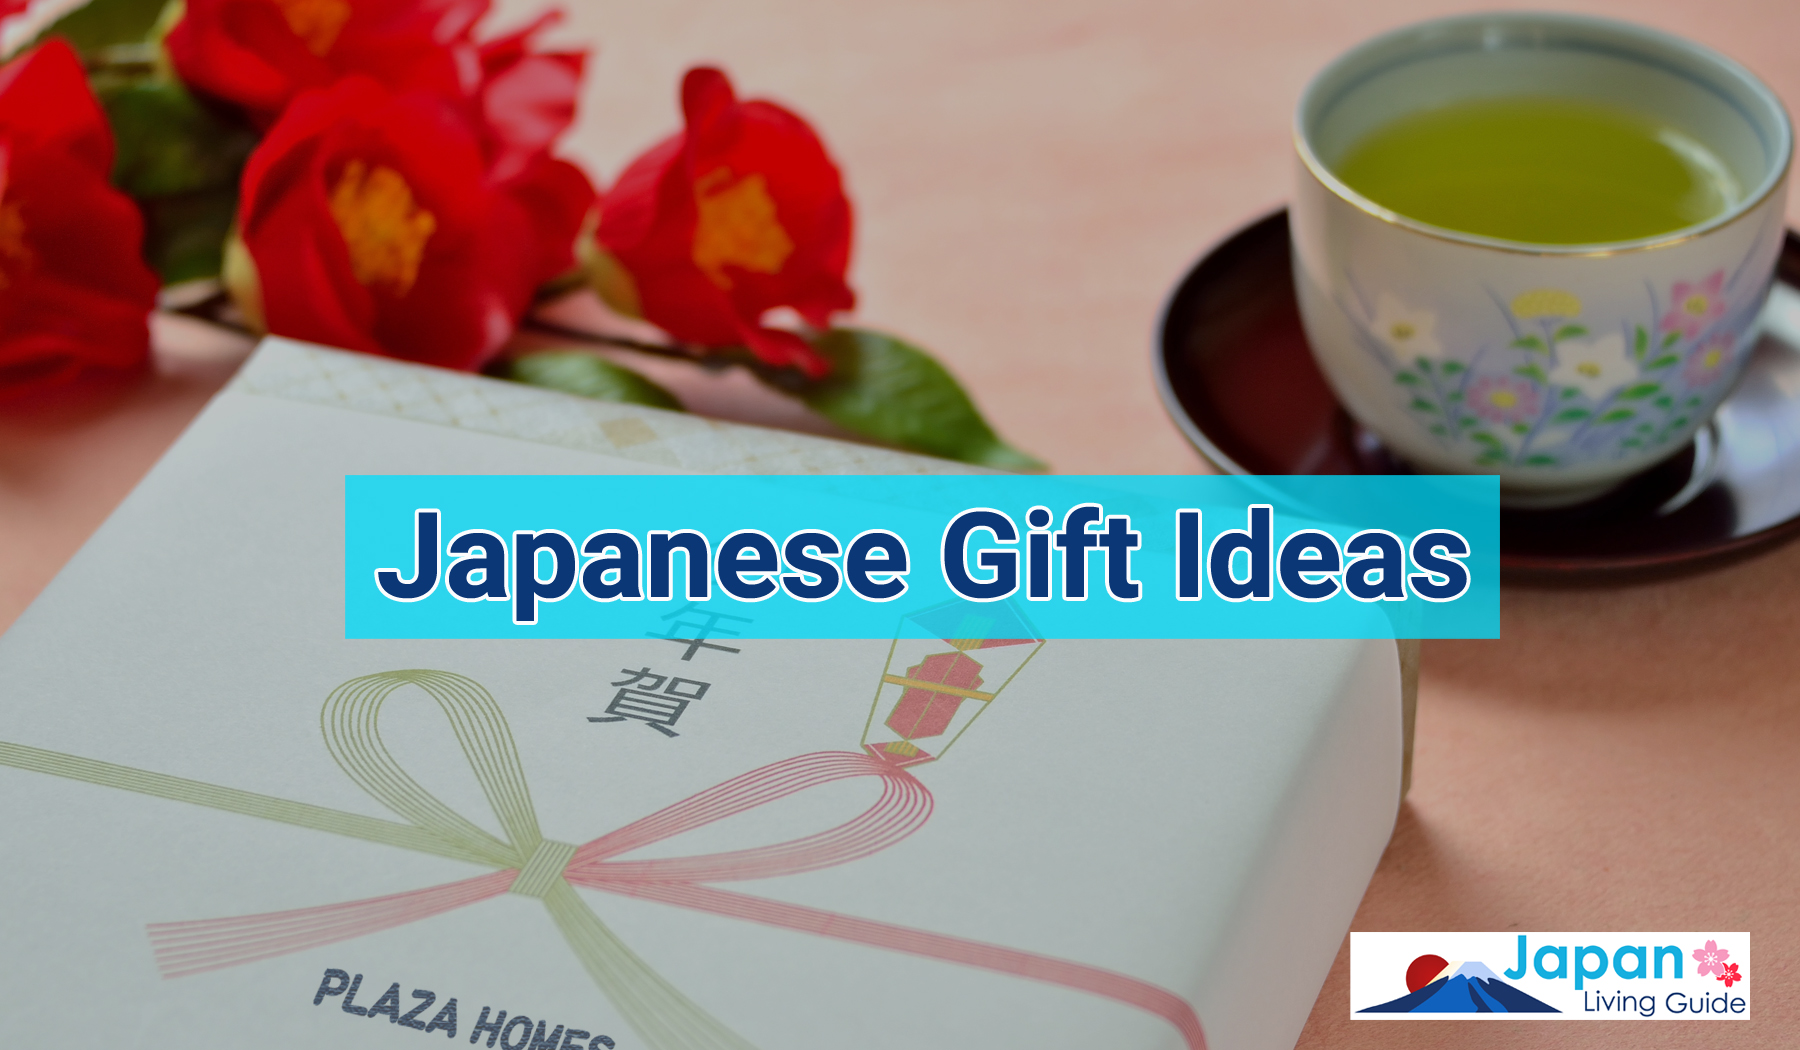 https://www.japanlivingguide.com/media/okrdeluh/24-best-japanese-gift-ideas-for-any-occasions.jpeg